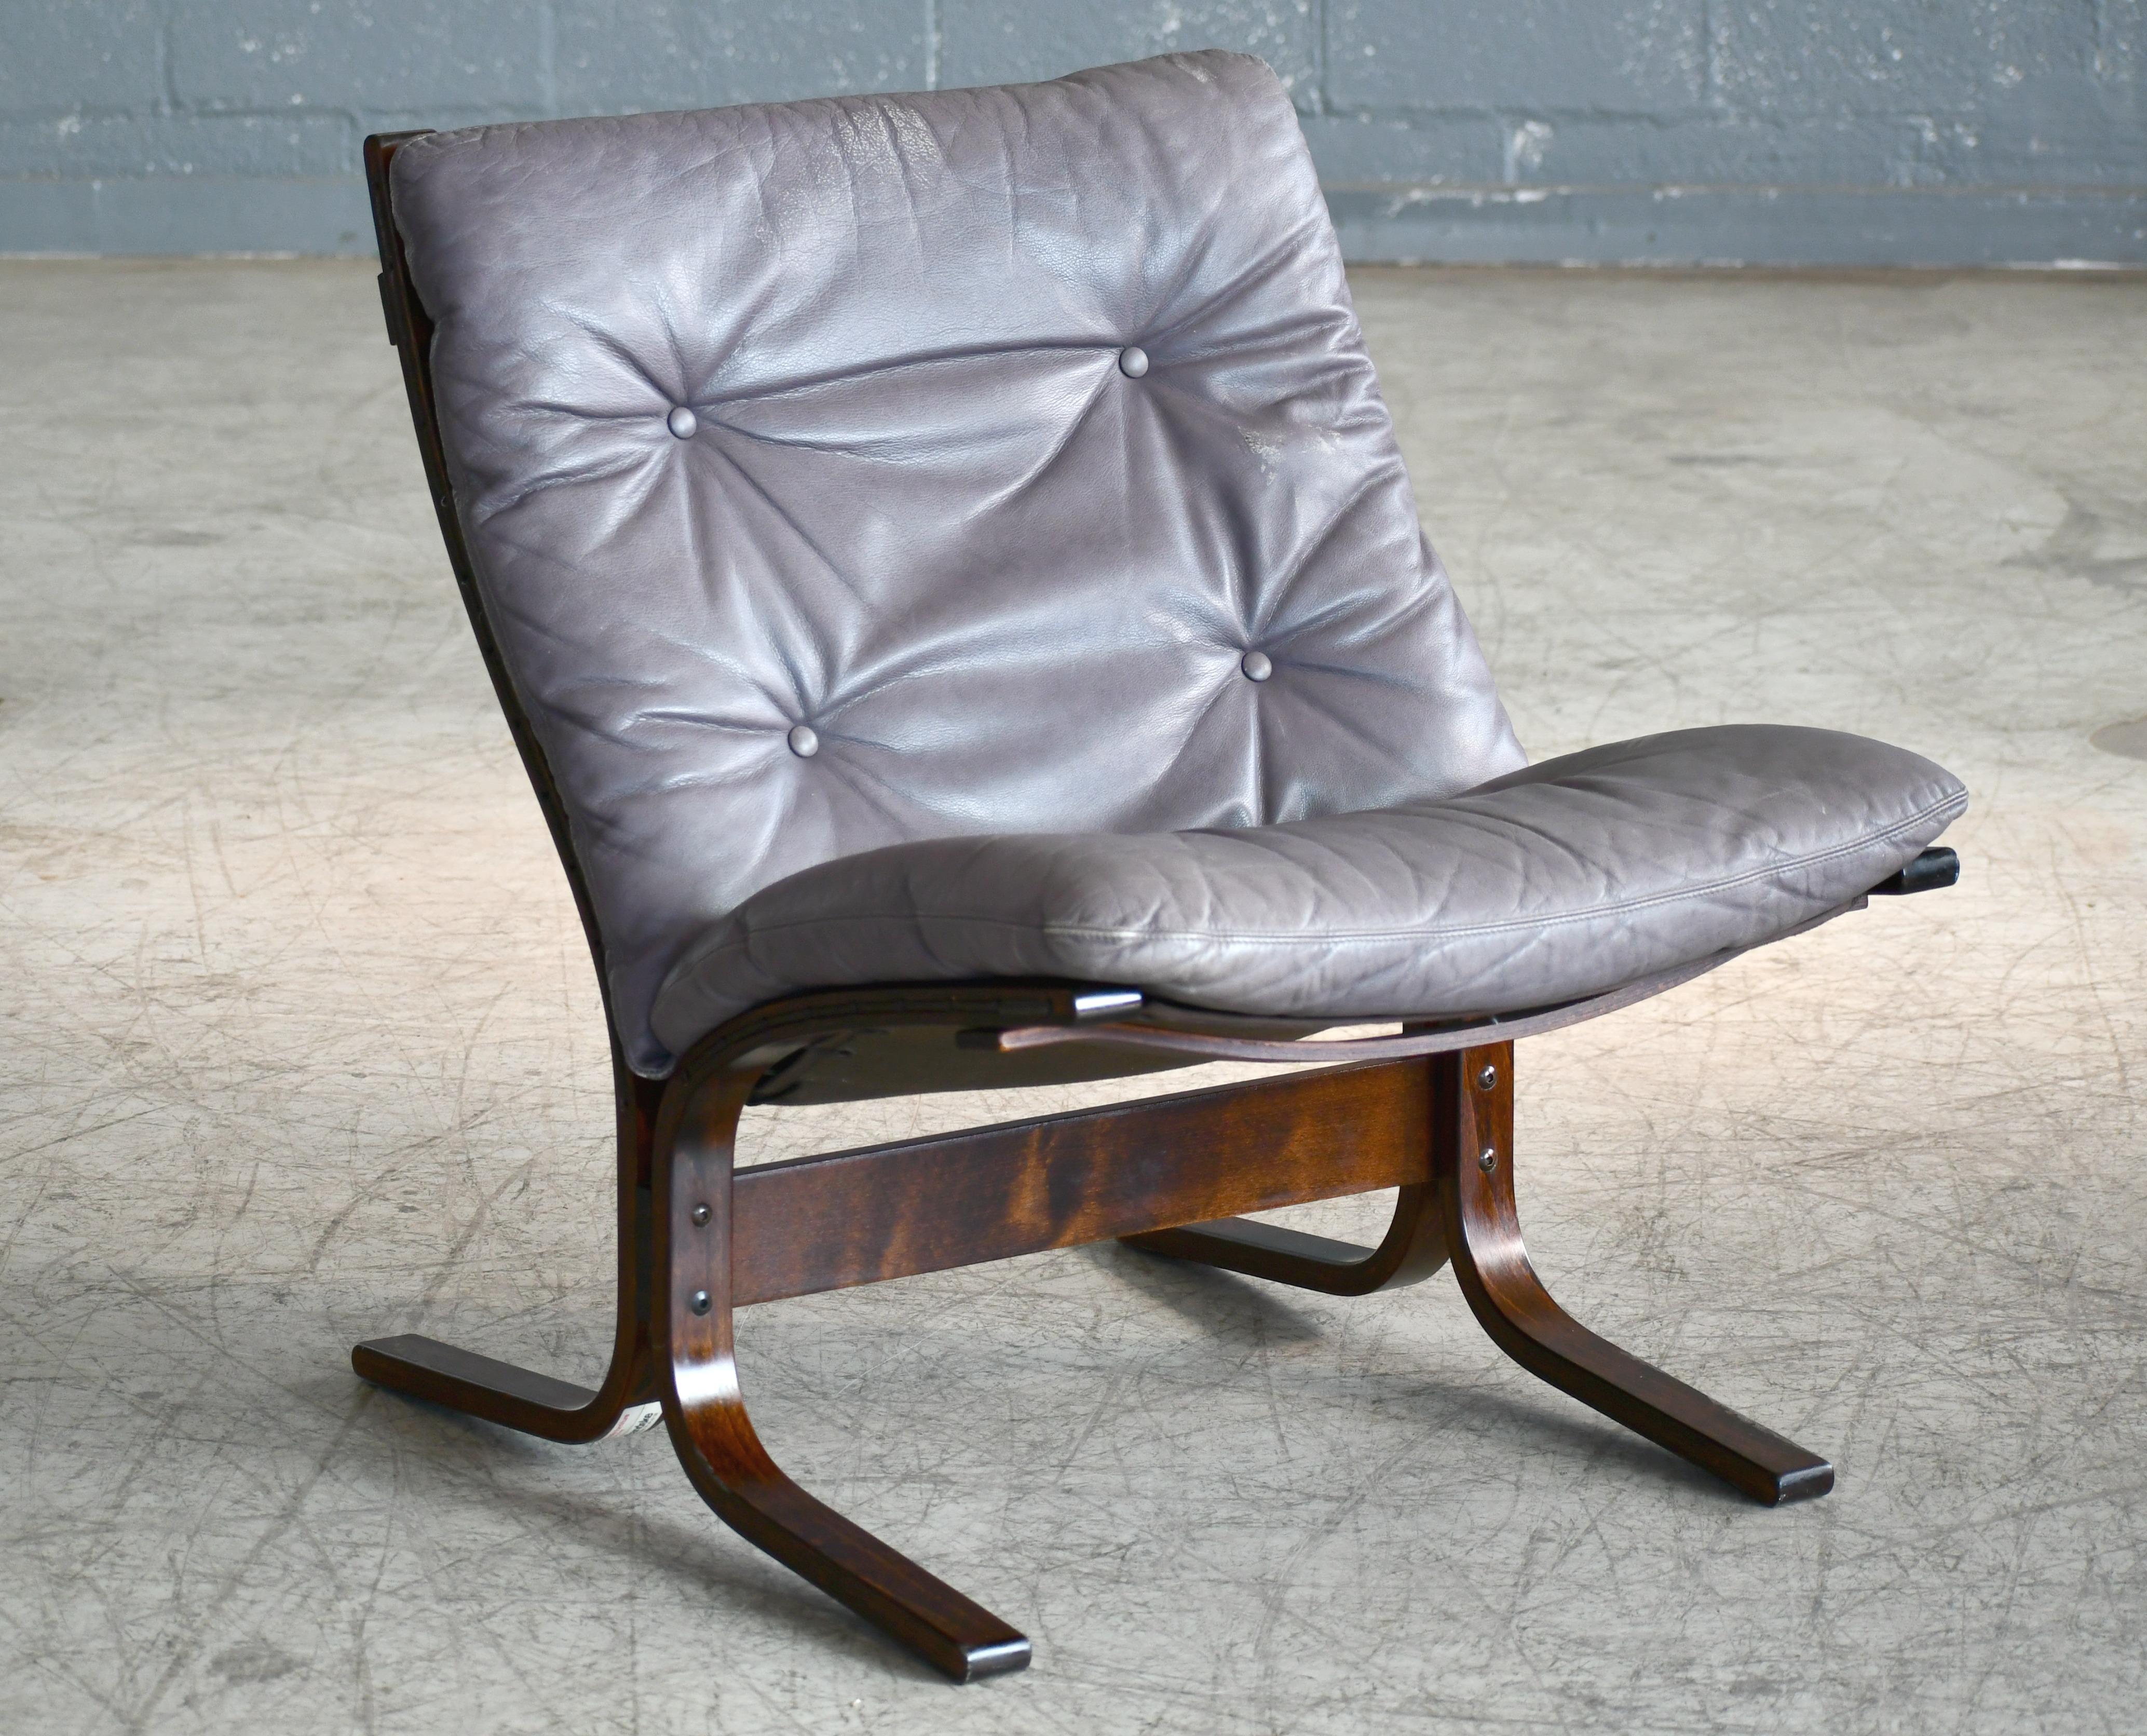 Great lowback Siesta chair grey leather with matching ottoman and dark stained bentwood frame. Designed by Ingmar Relling in the late 1960s and manufactured by Westnofa of Norway. The cushion made of top grain leather has obtained a very nice patina